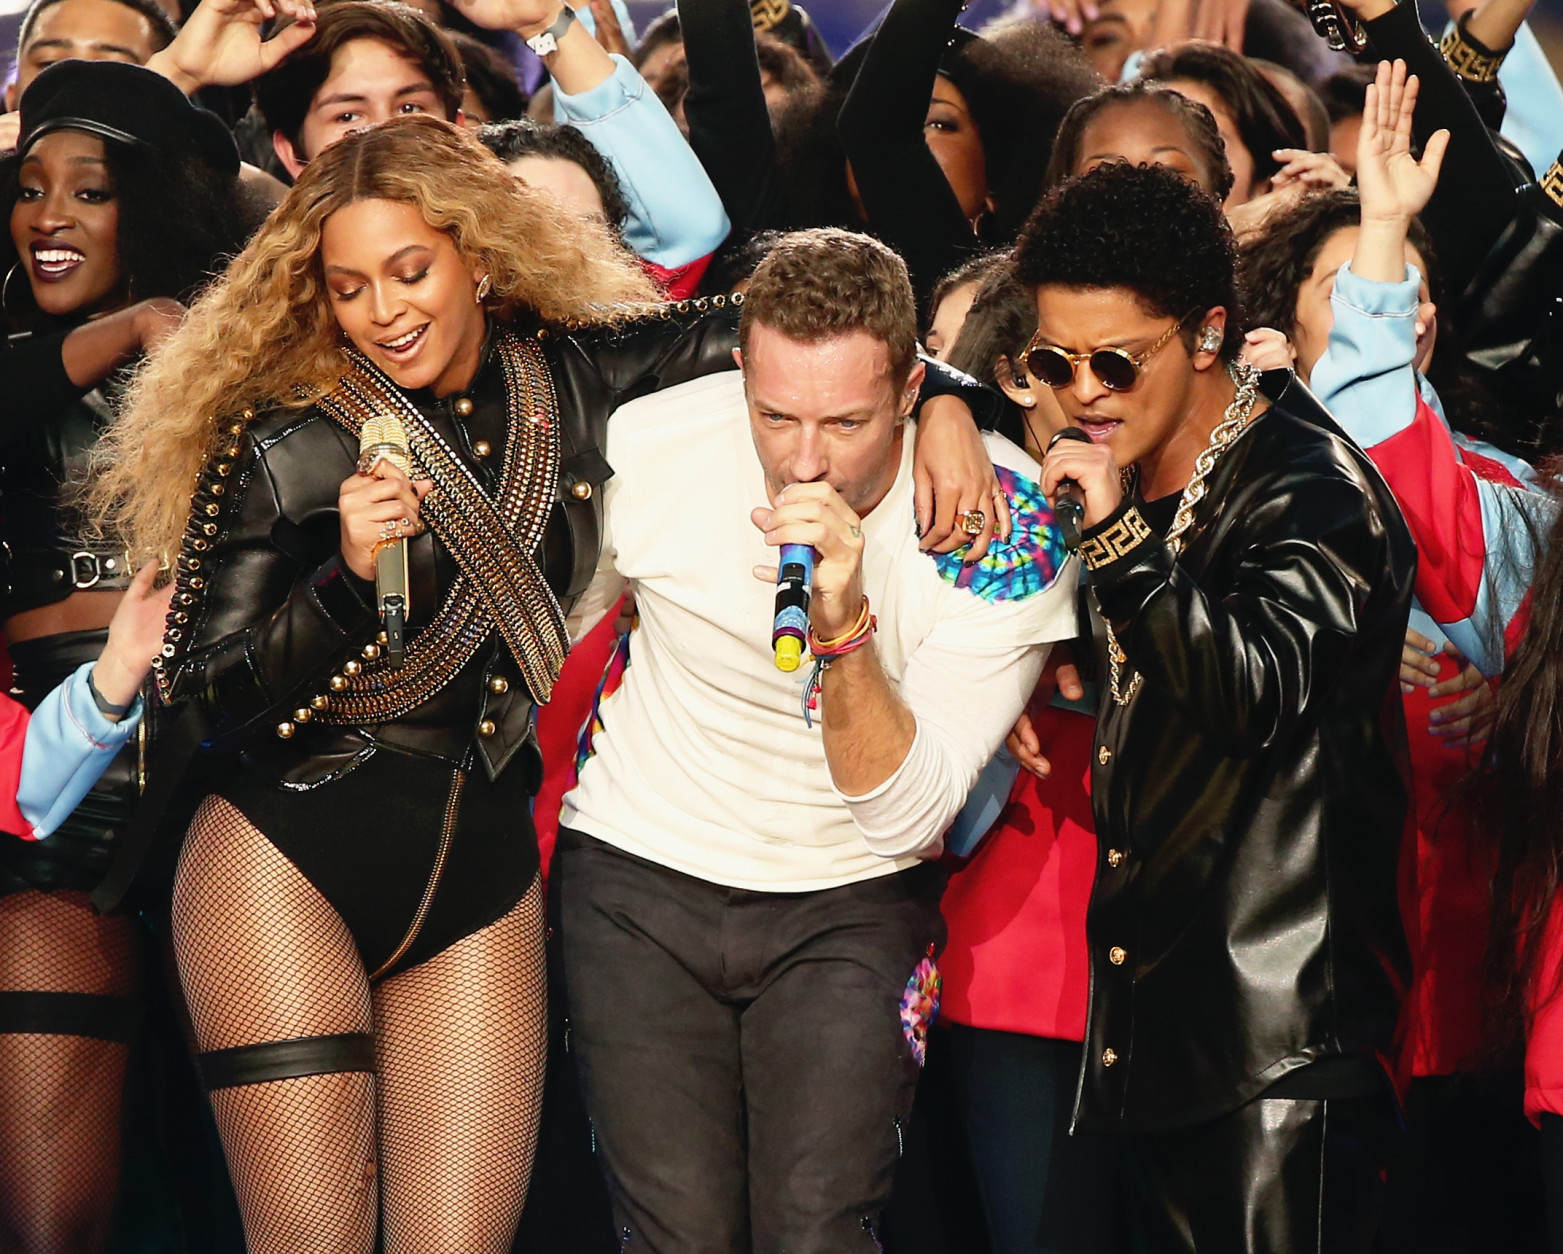 SANTA CLARA, CA - FEBRUARY 07:  (L-R) Beyonce, Chris Martin of Coldplay and Bruno Mars perform onstage during the Pepsi Super Bowl 50 Halftime Show at Levi's Stadium on February 7, 2016 in Santa Clara, California.  (Photo by Christopher Polk/Getty Images)